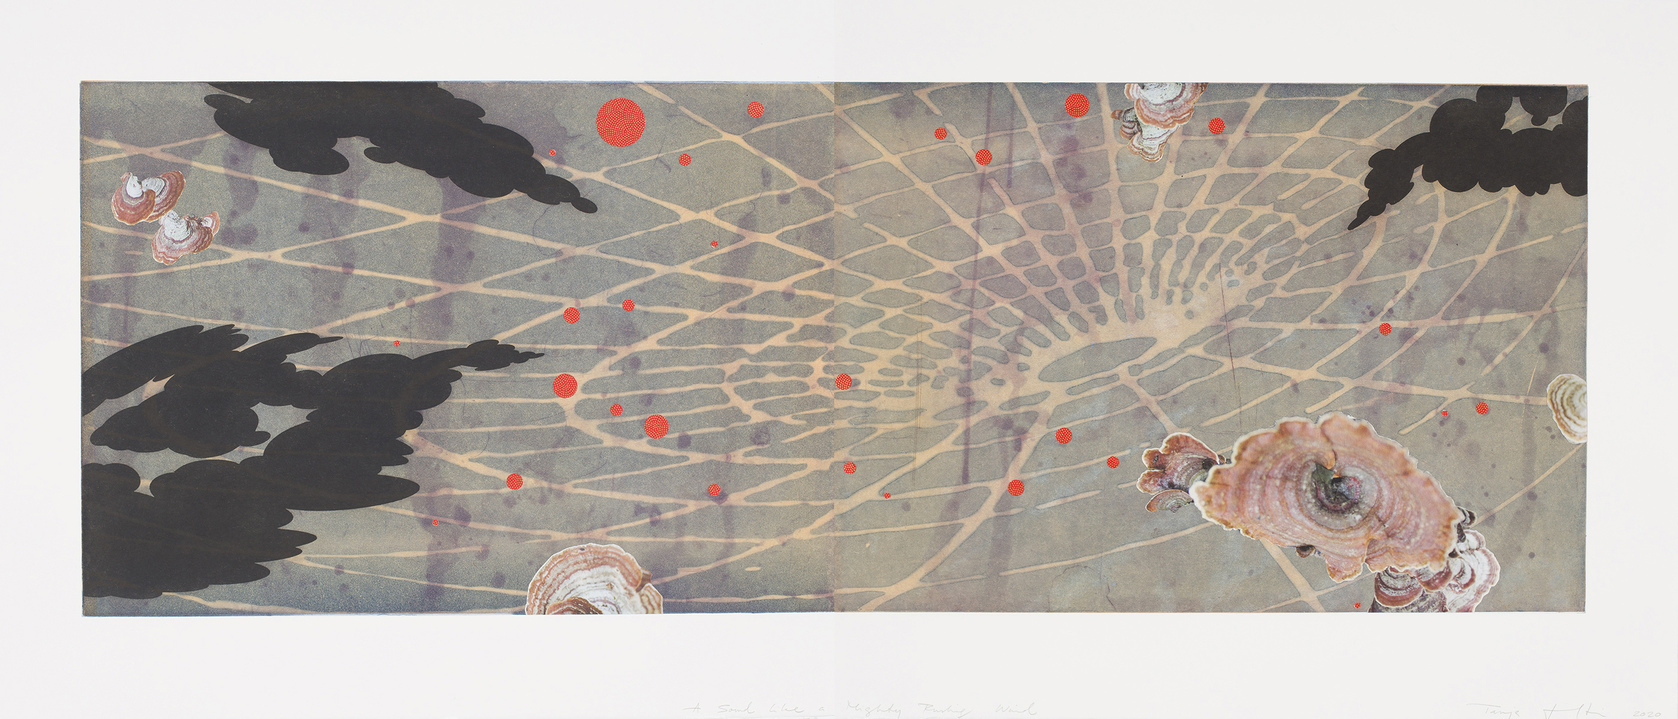 Tanja Softić Rushing Wind 2020 etching, photopolymer etching, chiyogami and digital print collage